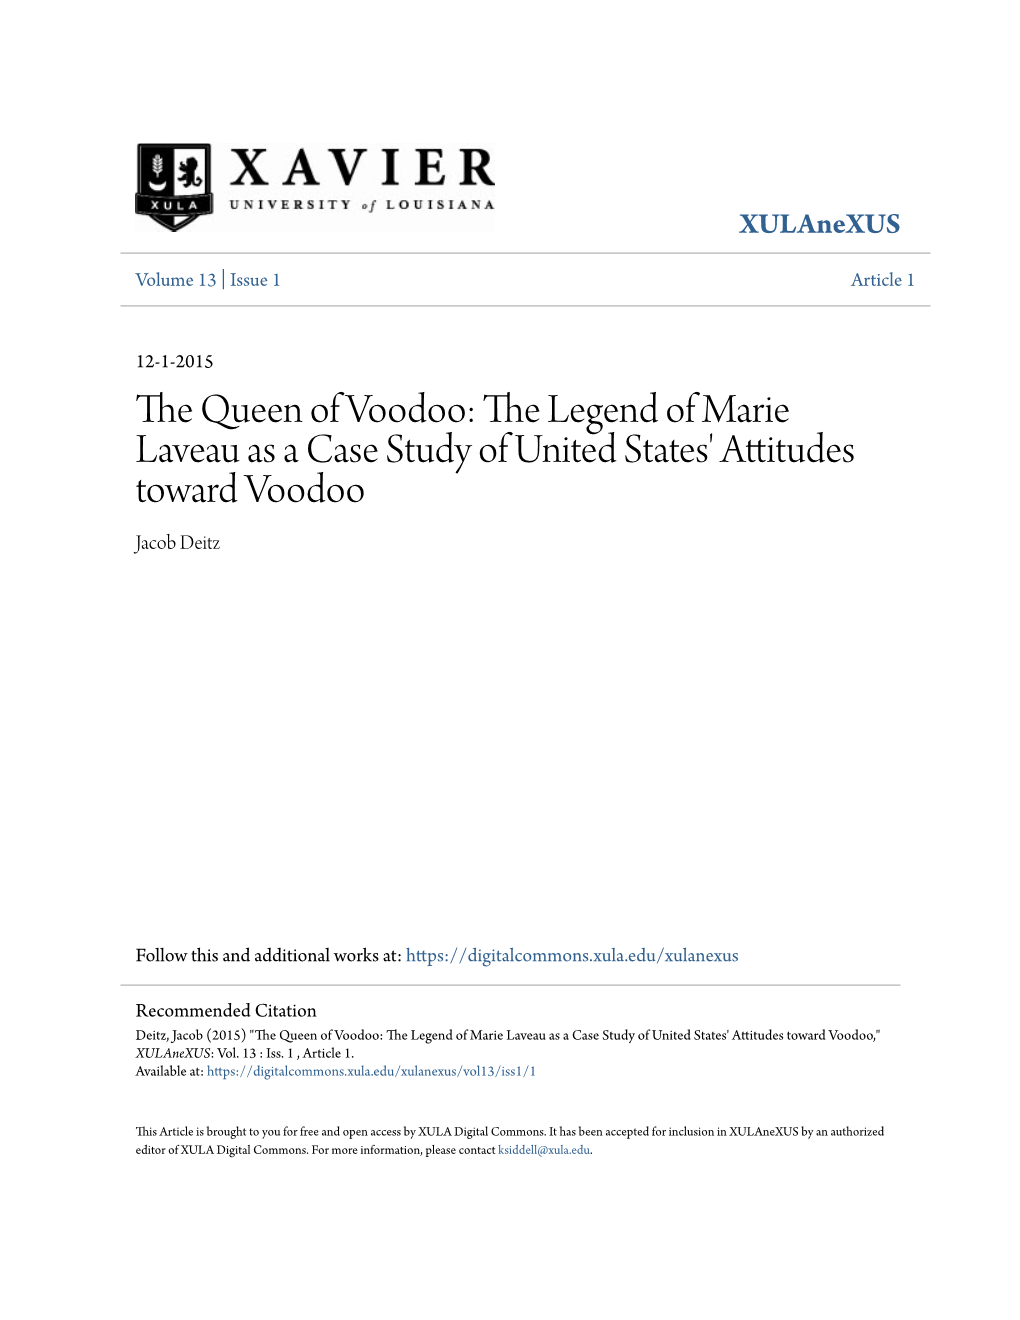 The Queen of Voodoo: the Legend of Marie Laveau As a Case Study of United States' Attitudes Toward Voodoo Jacob Deitz